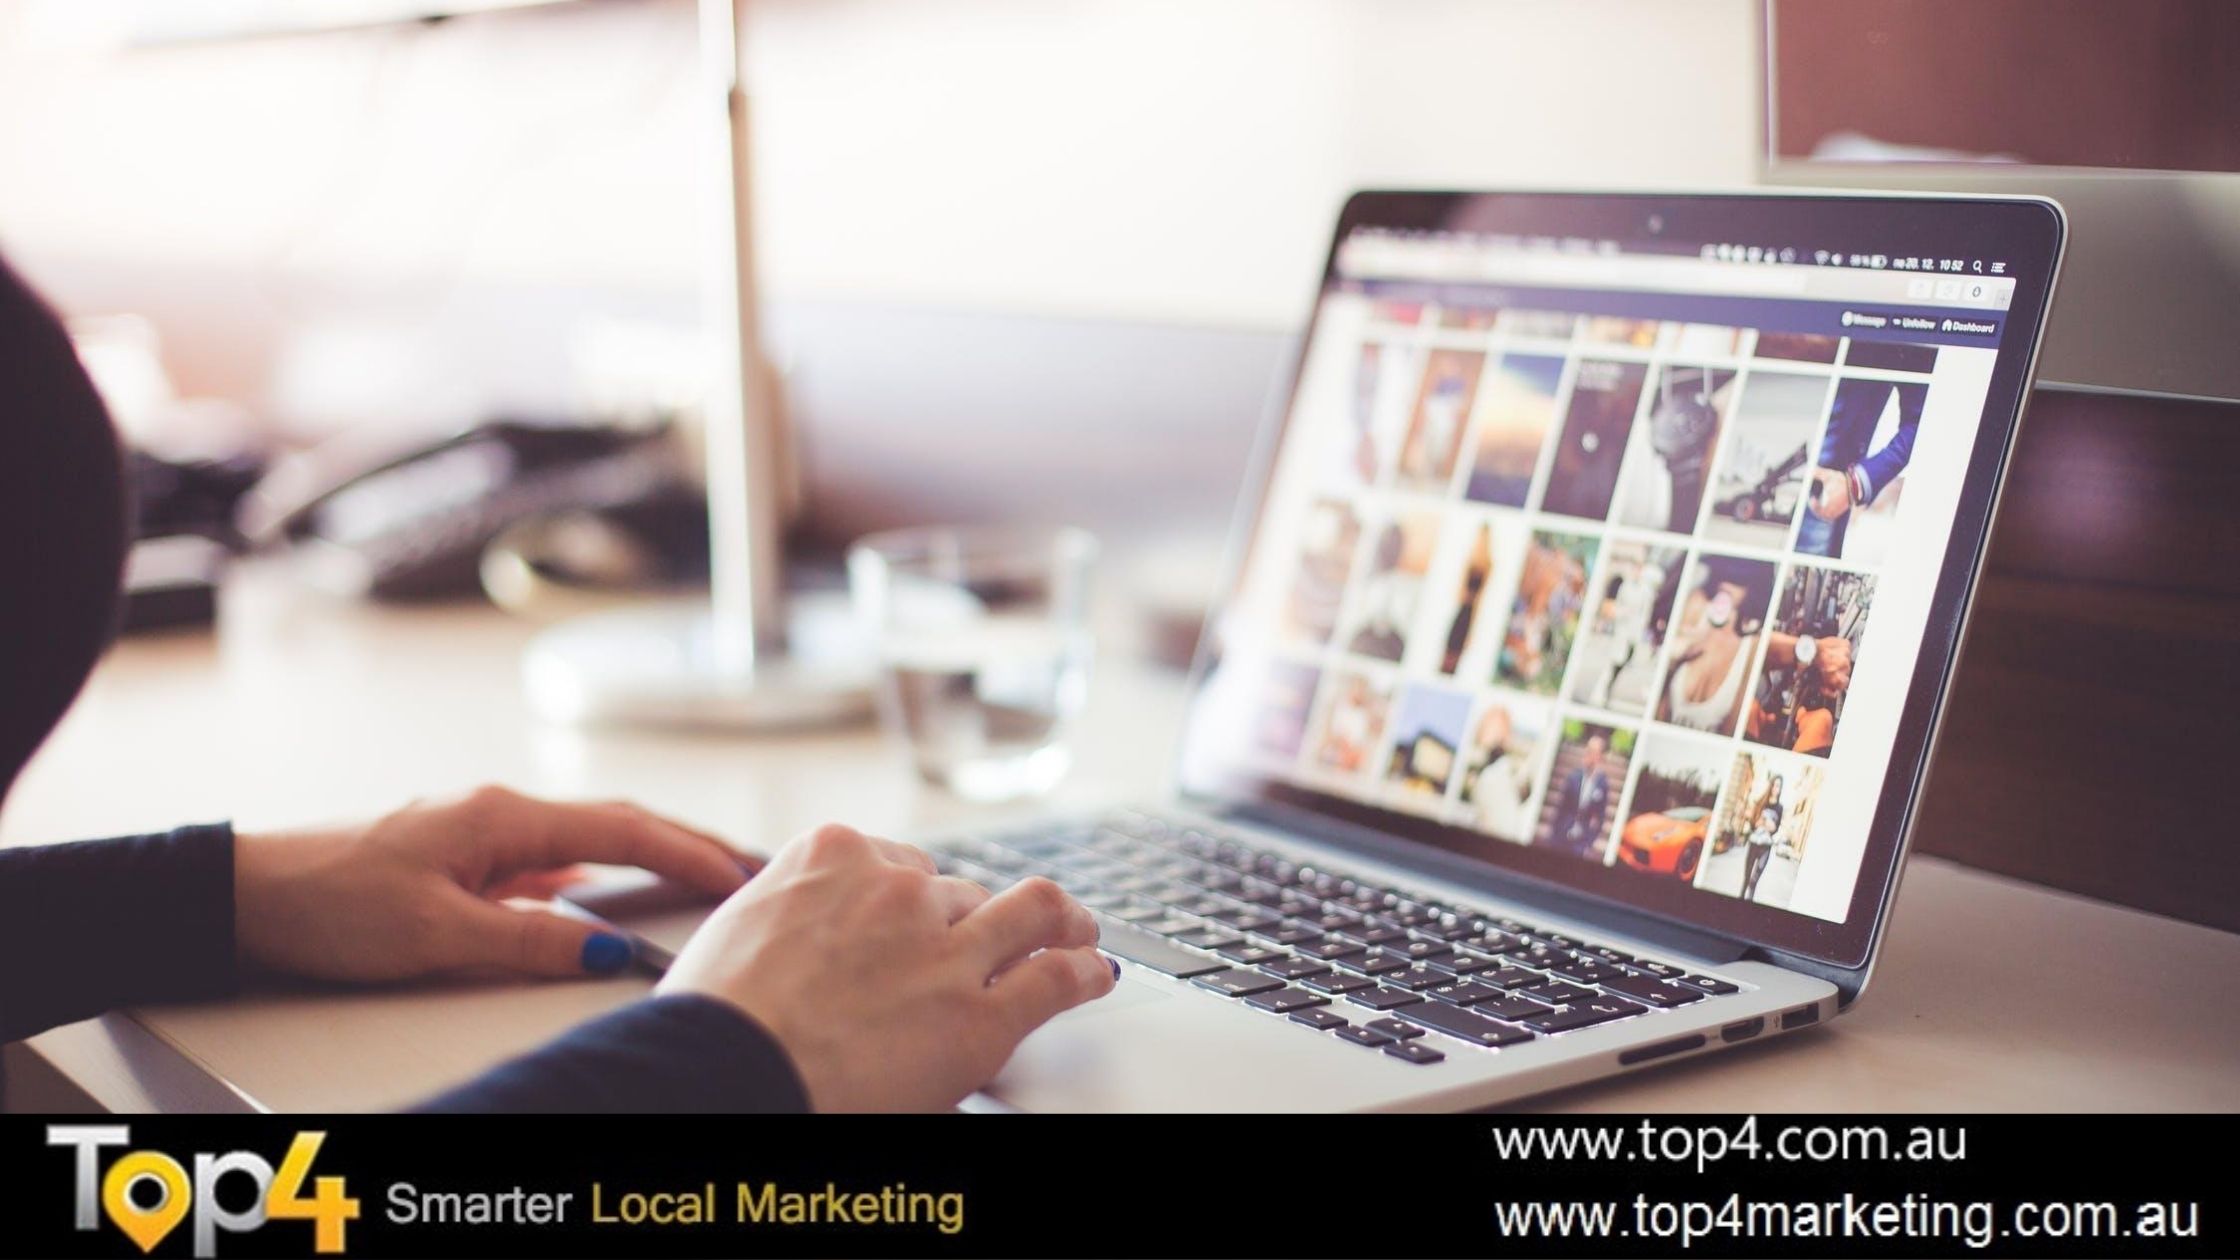 Local Marketing Campaign Examples That Worked - Top4 Marketing